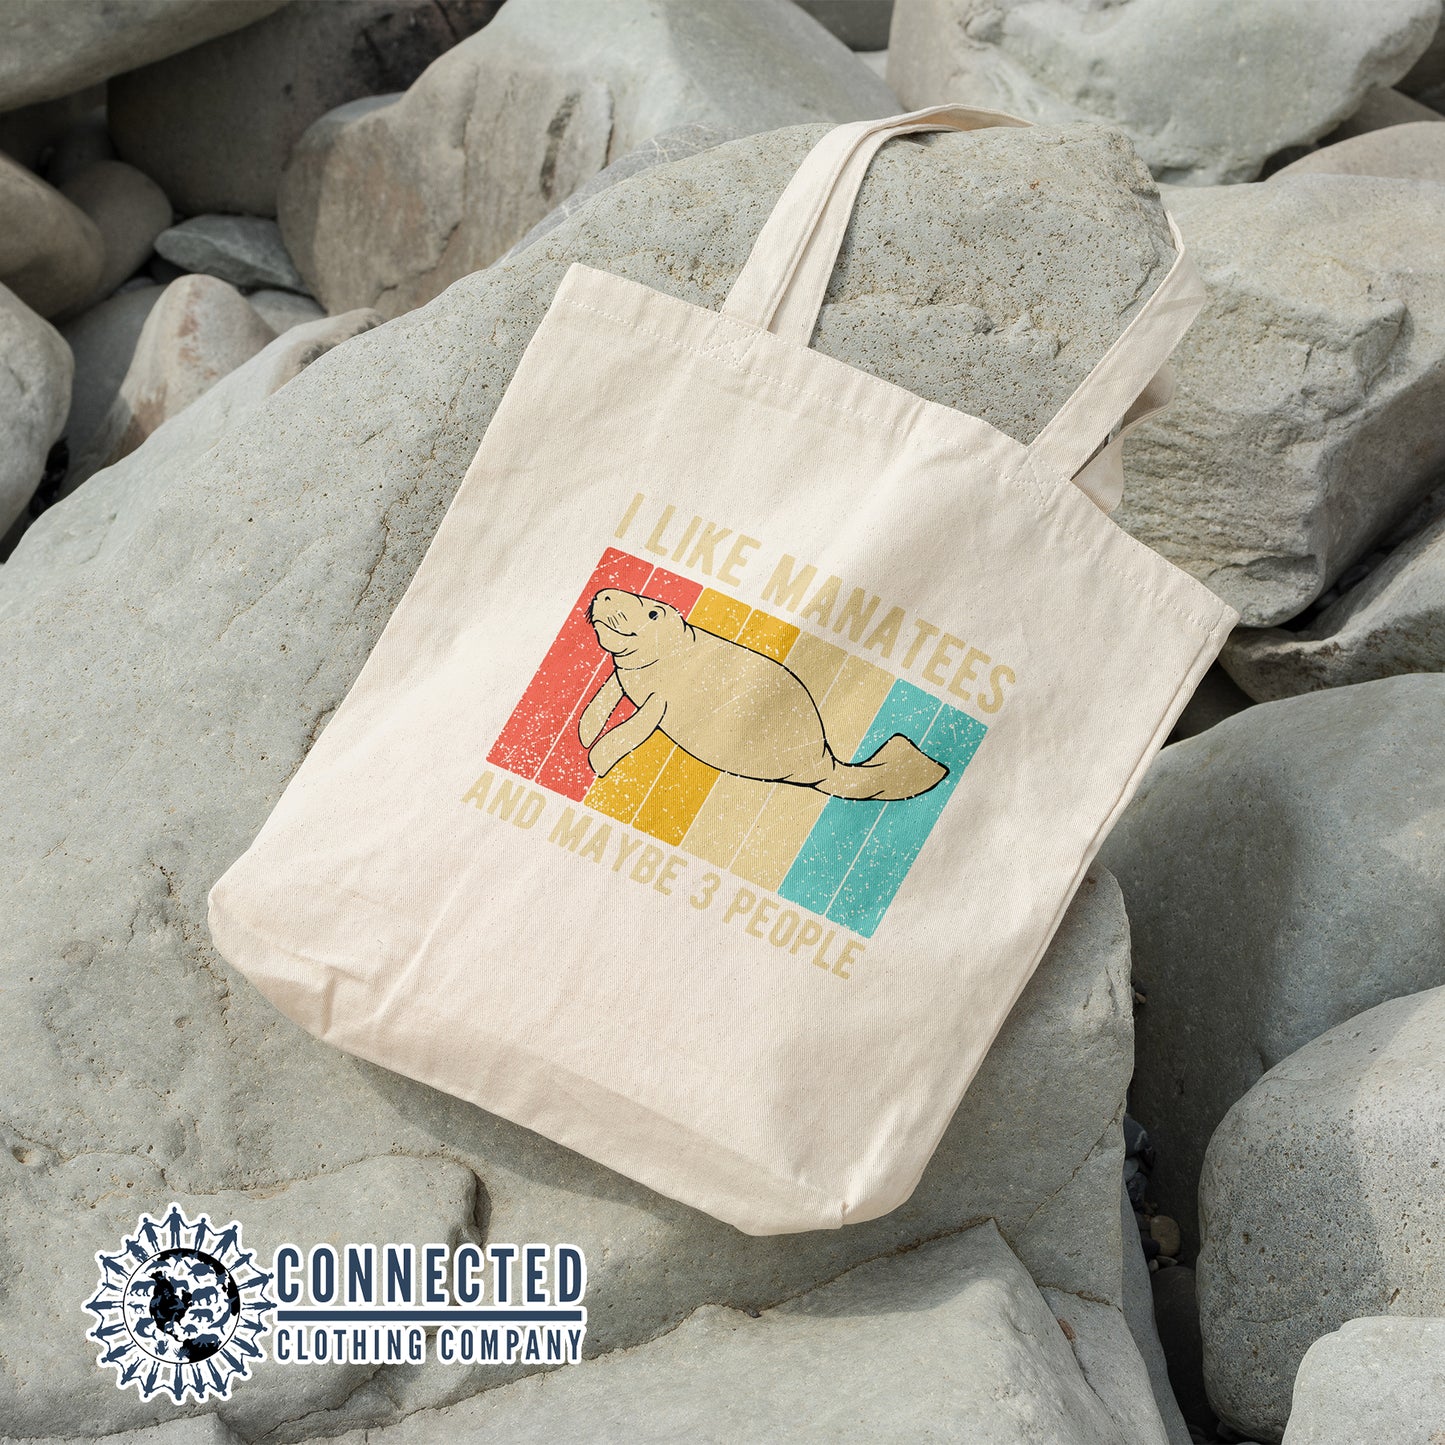 I Like Manatees Tote Bag - sweetsherriloudesigns - 10% of proceeds donated to ocean conservation